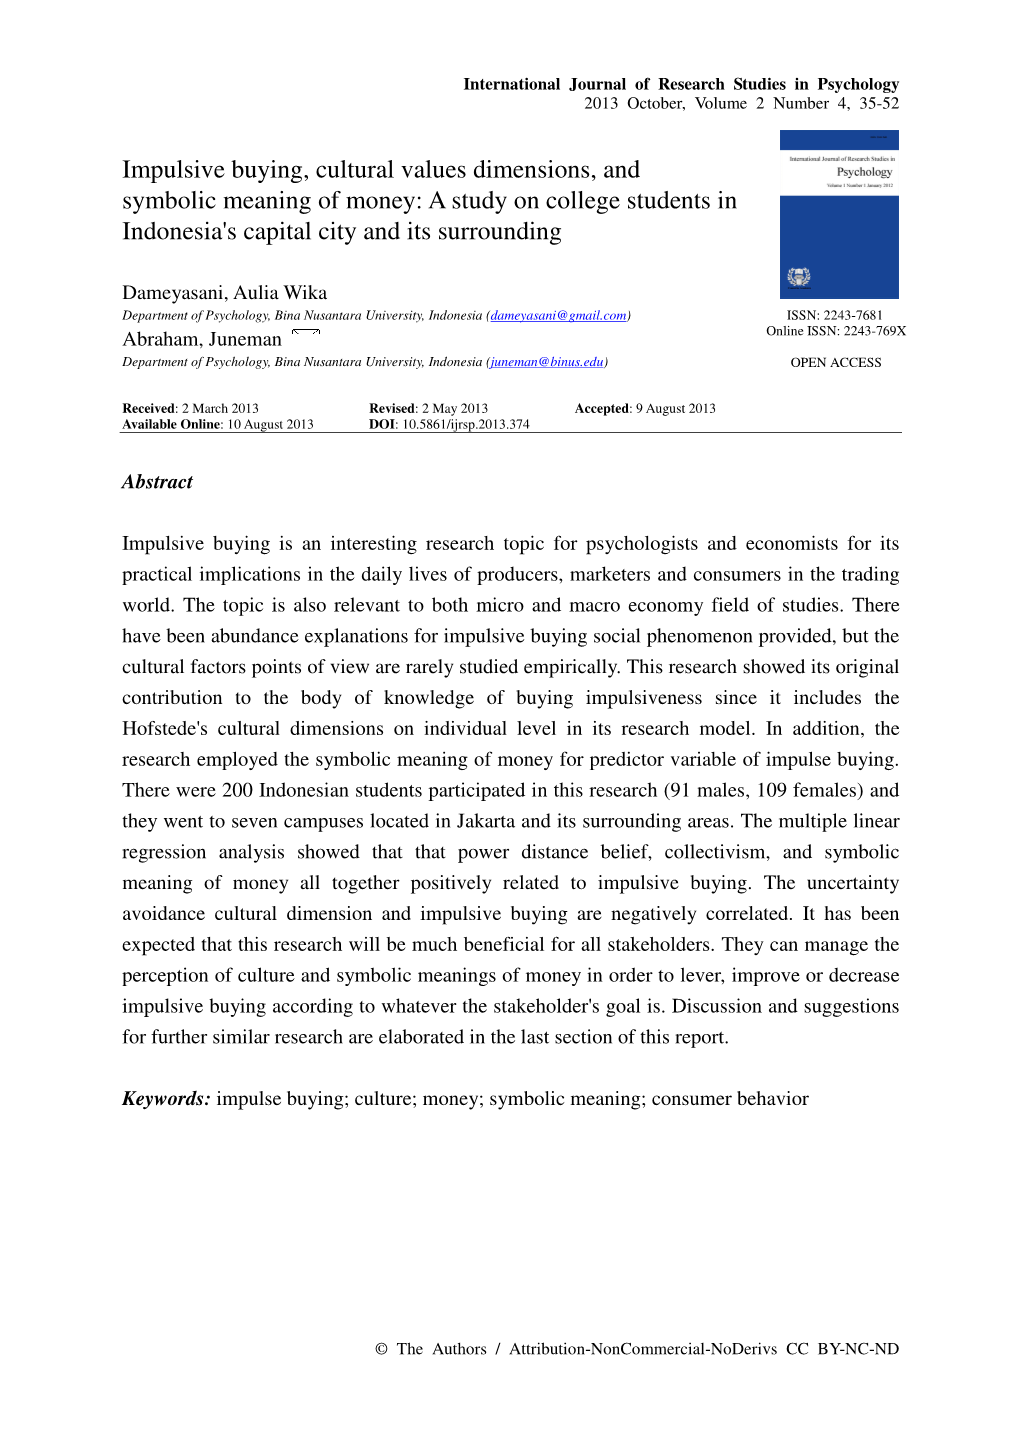 Impulsive Buying, Cultural Values Dimensions, and Symbolic Meaning of Money: a Study on College Students in Indonesia's Capital City and Its Surrounding